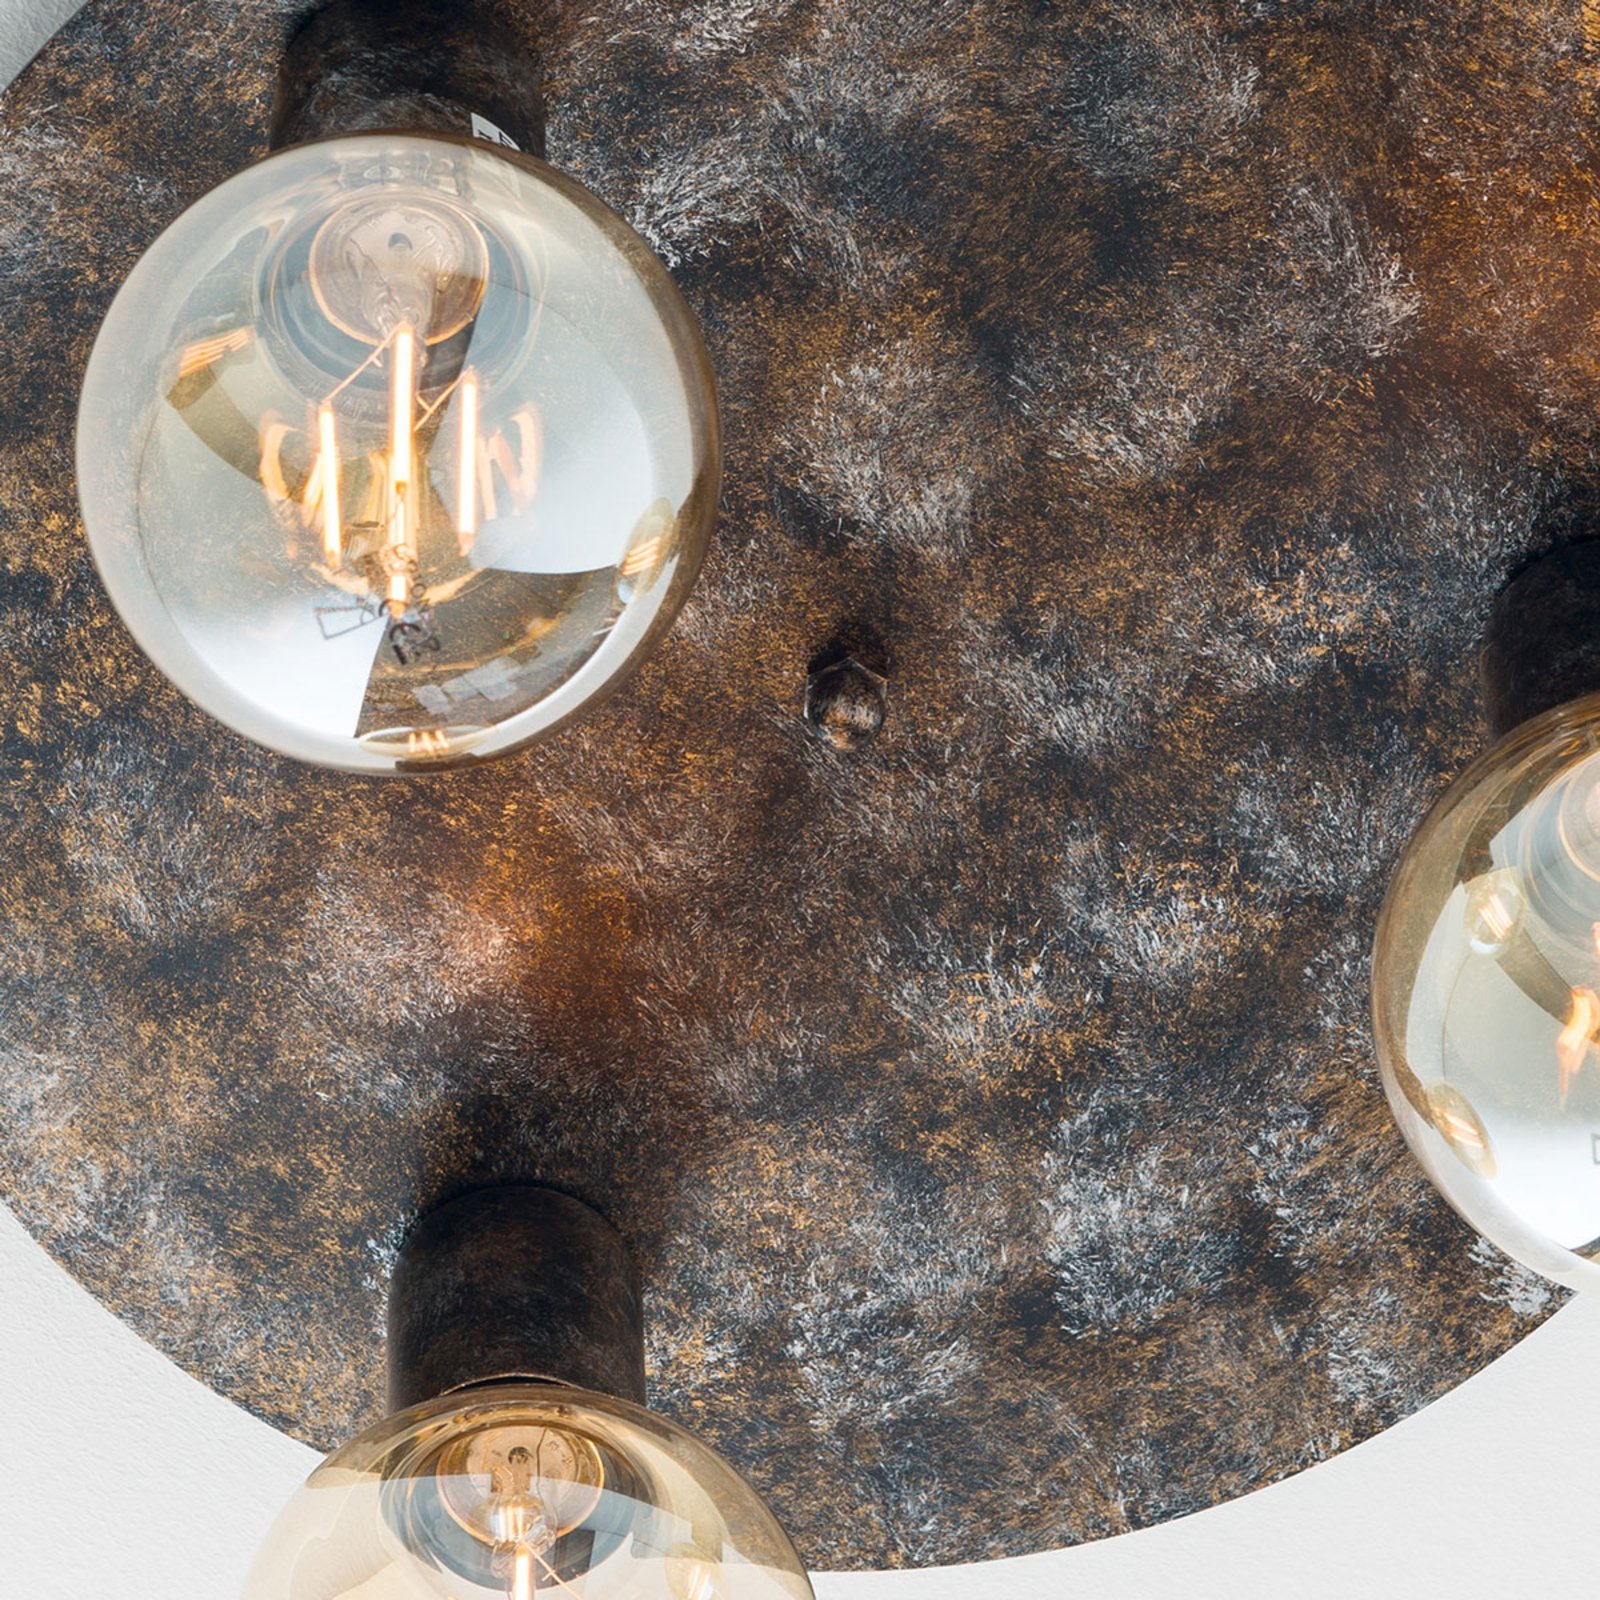 Three-bulb ceiling light Rati in a vintage look